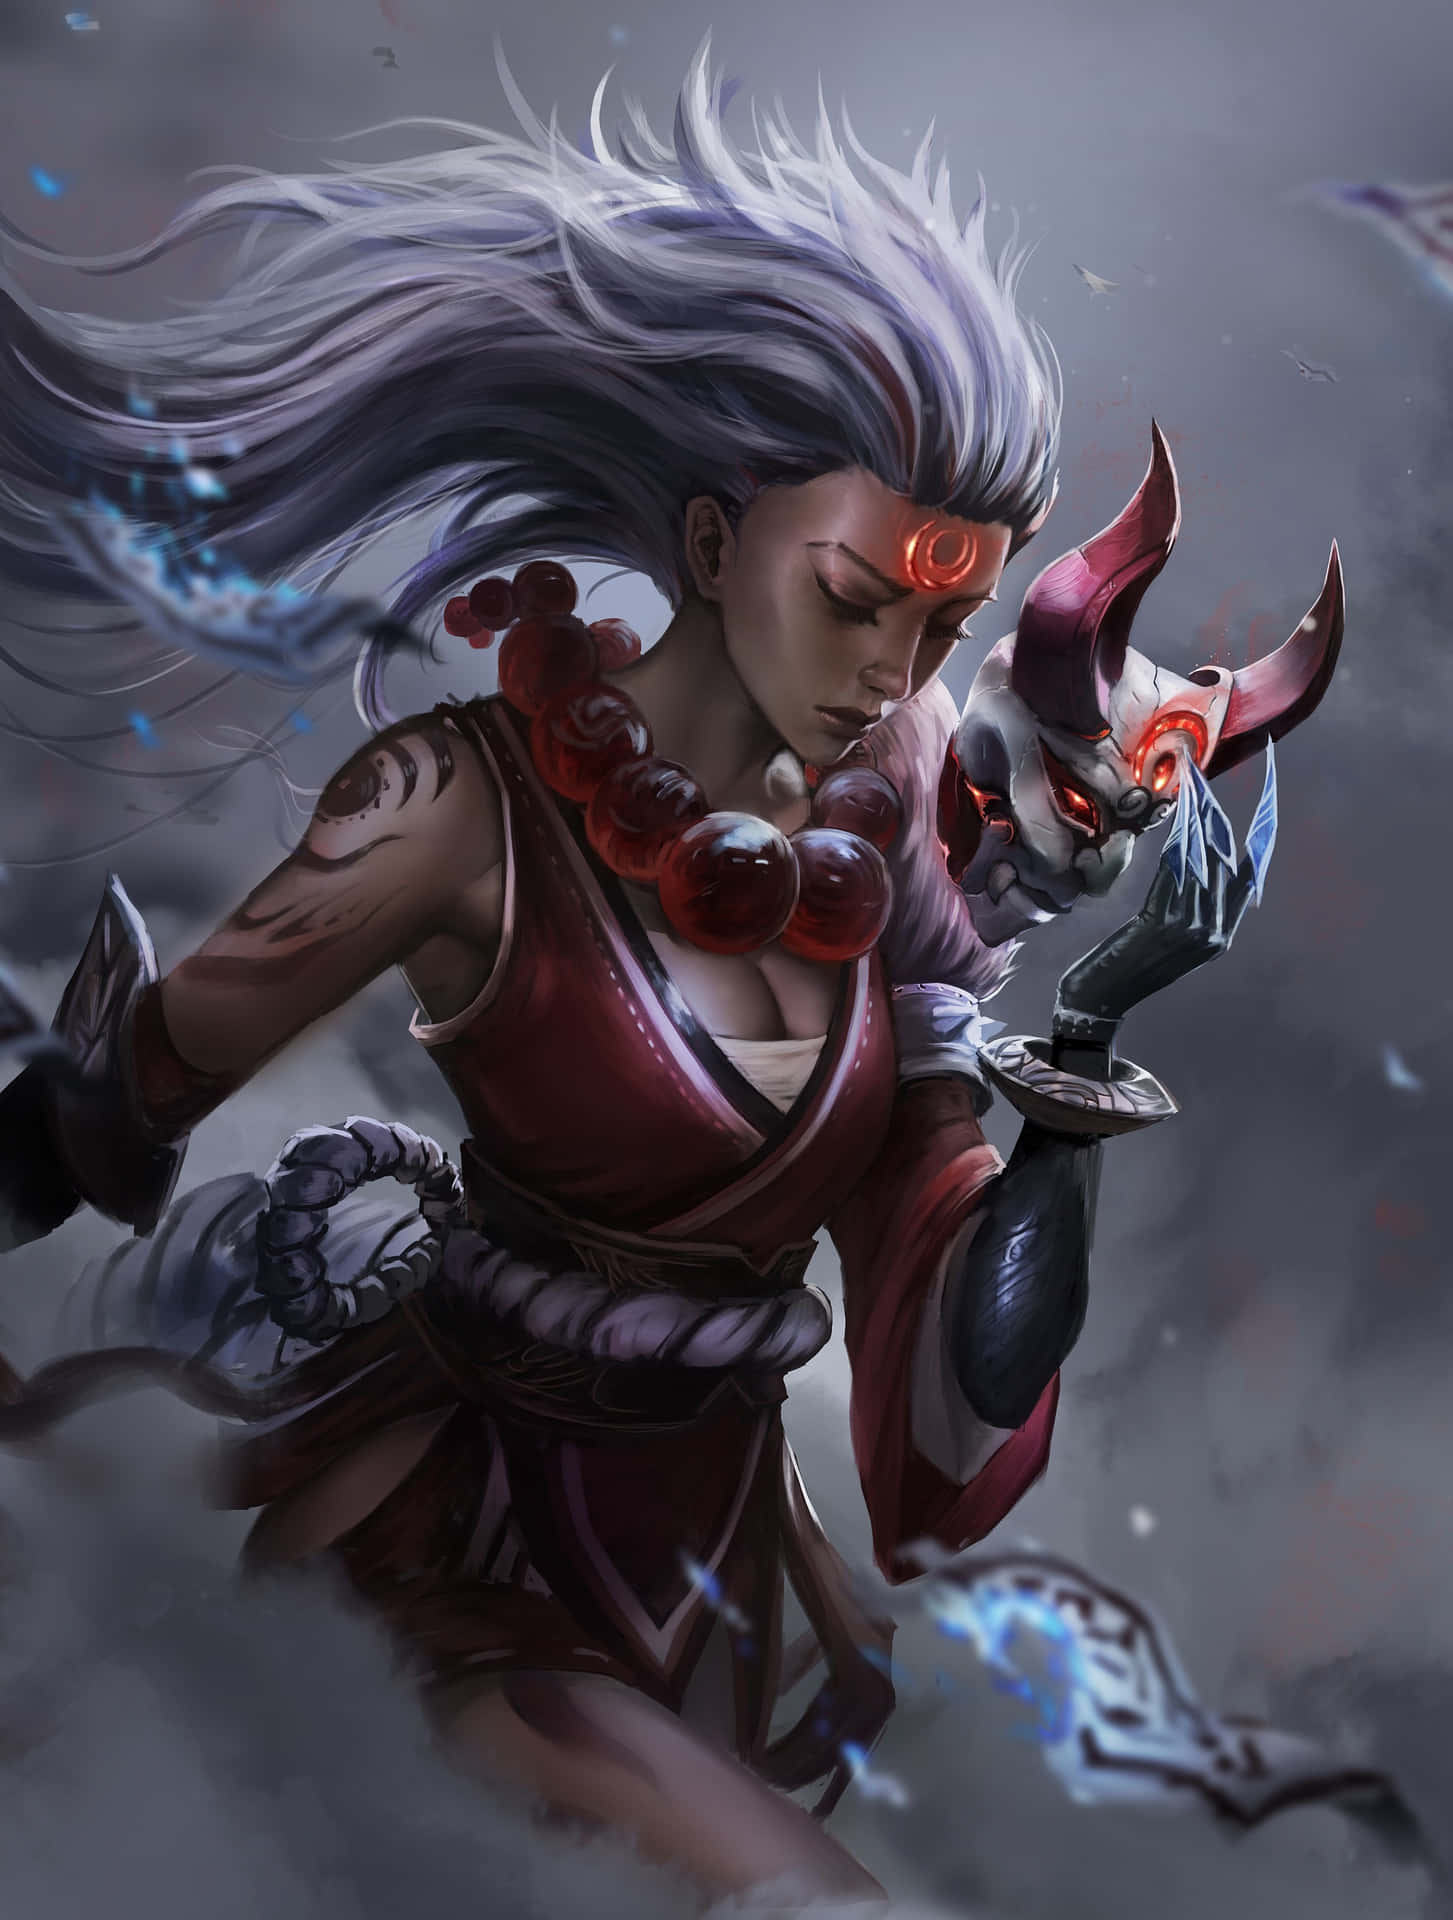 Get Into The League Of Legends Action On Your Phone! Background